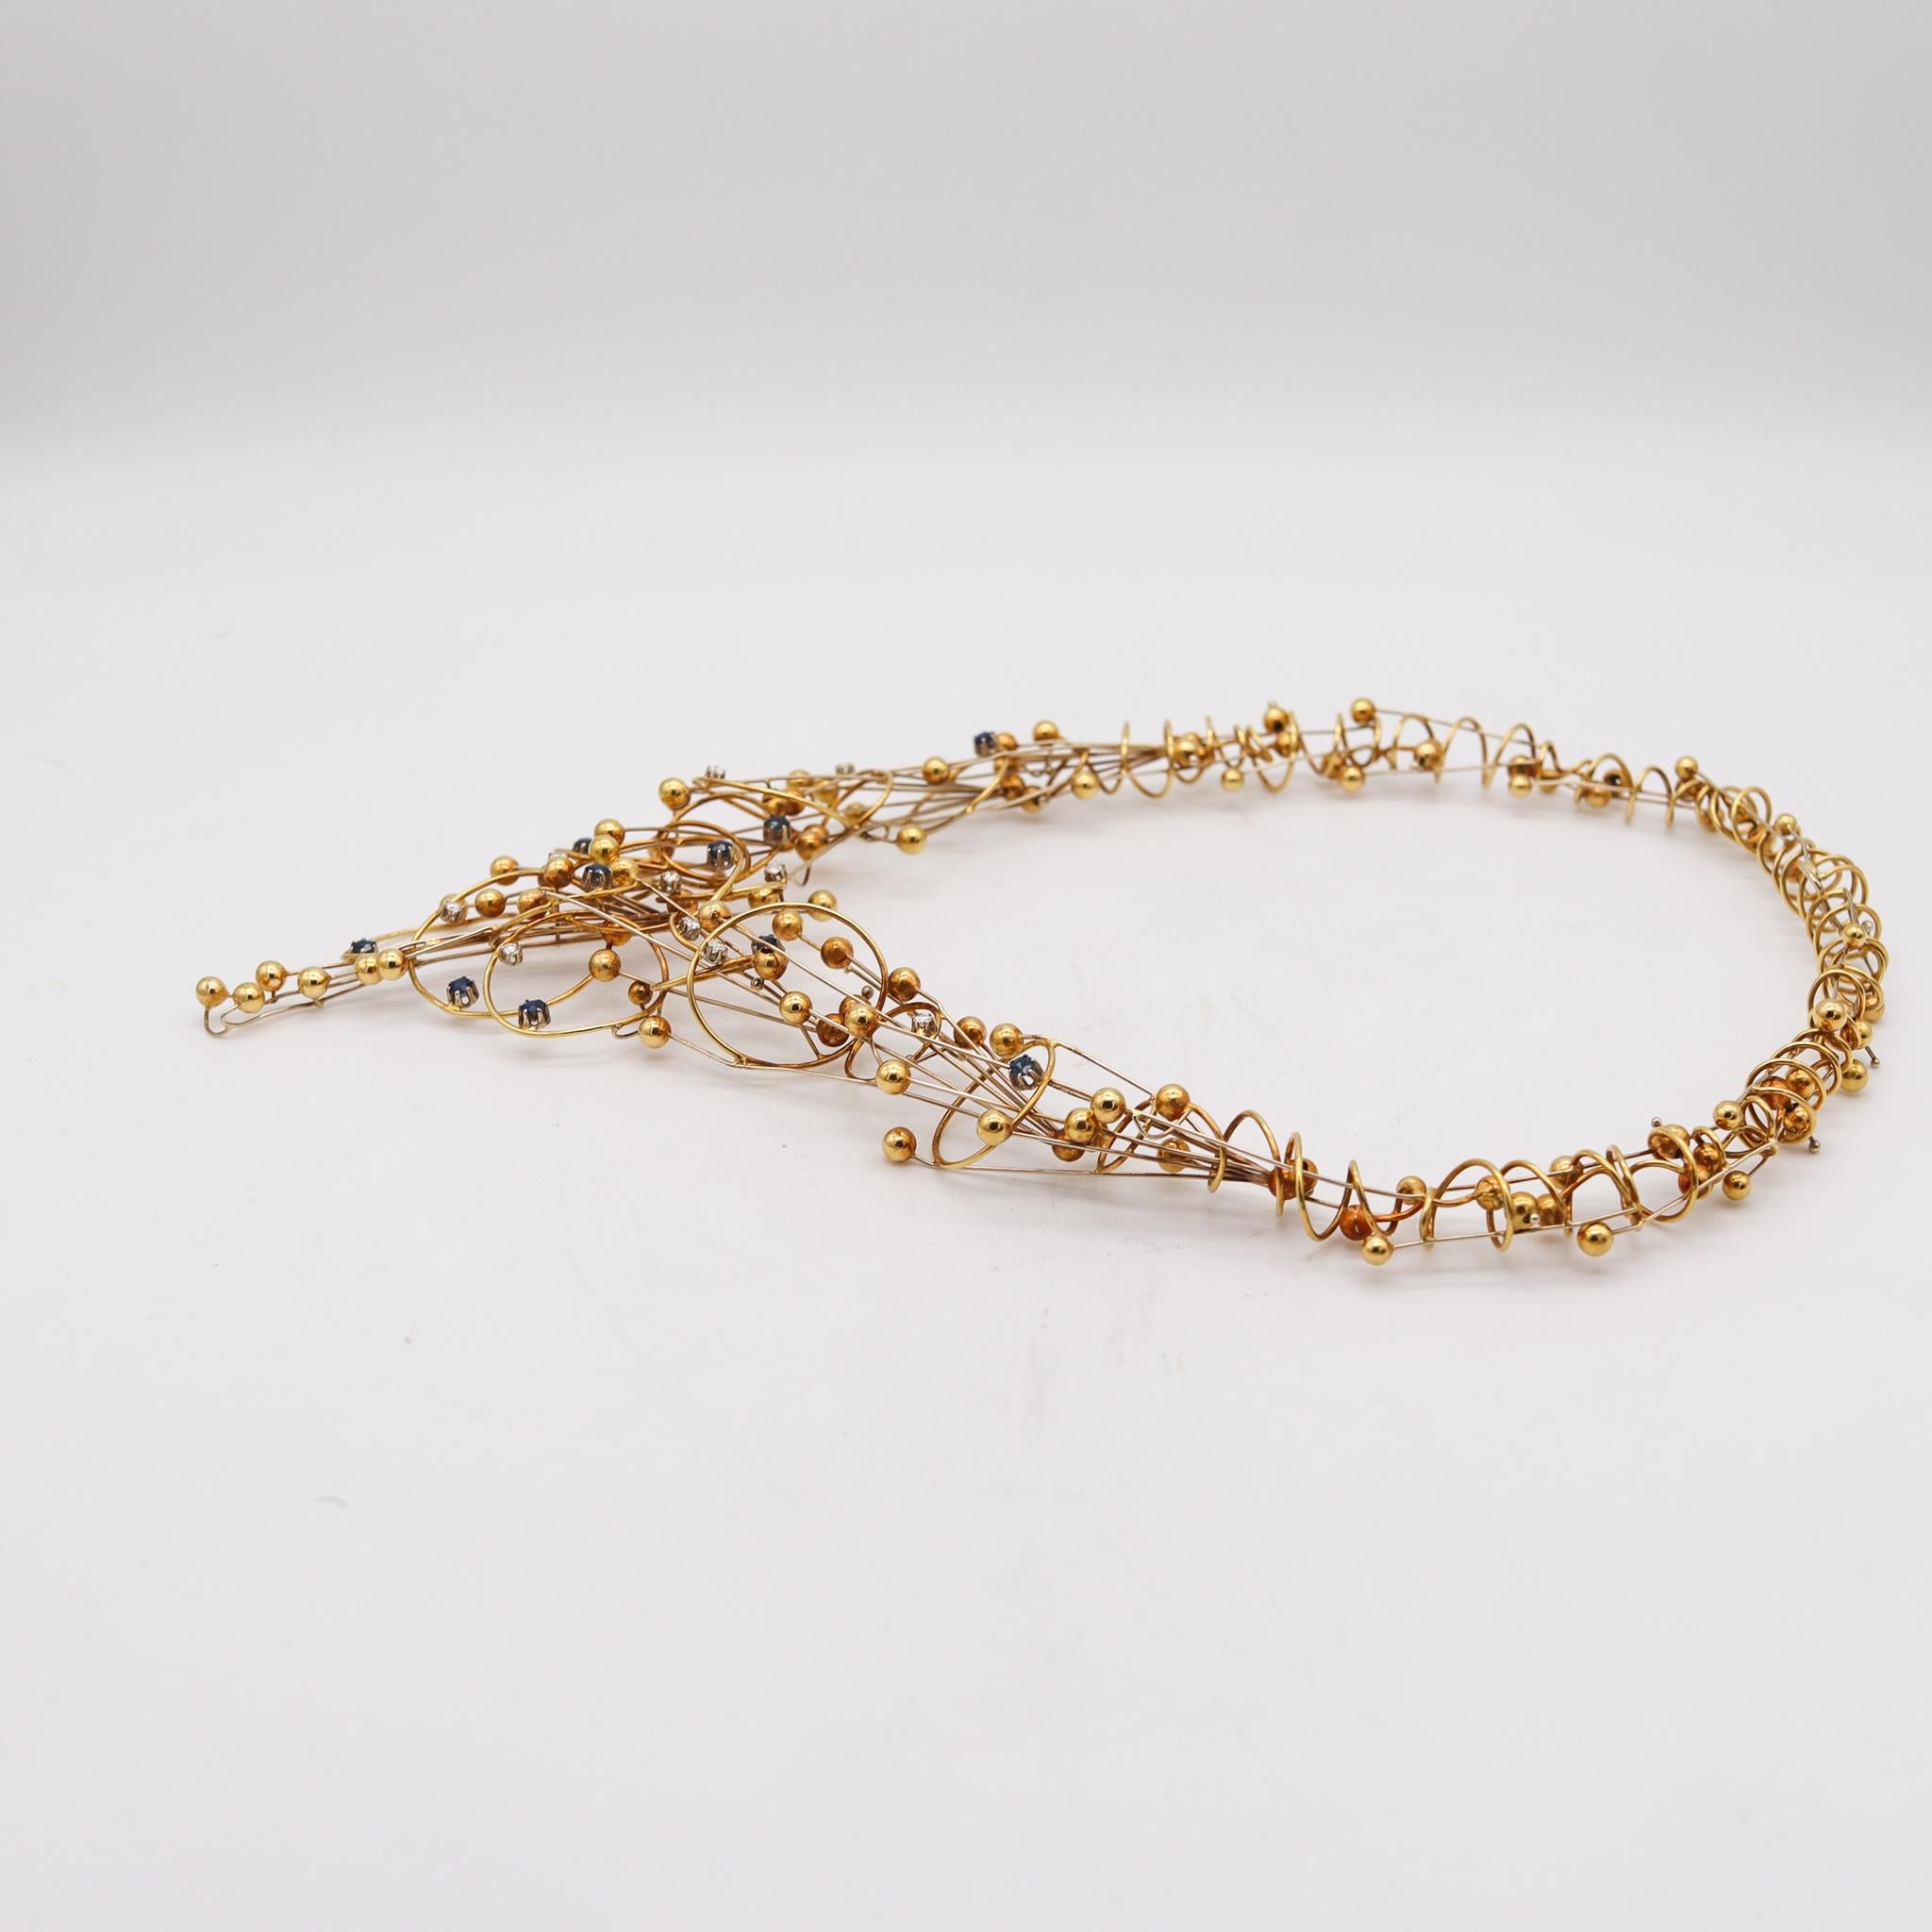 Modernist Studio 1970 Geometric Necklace In 18Kt Gold With Diamonds & Sapphires For Sale 3